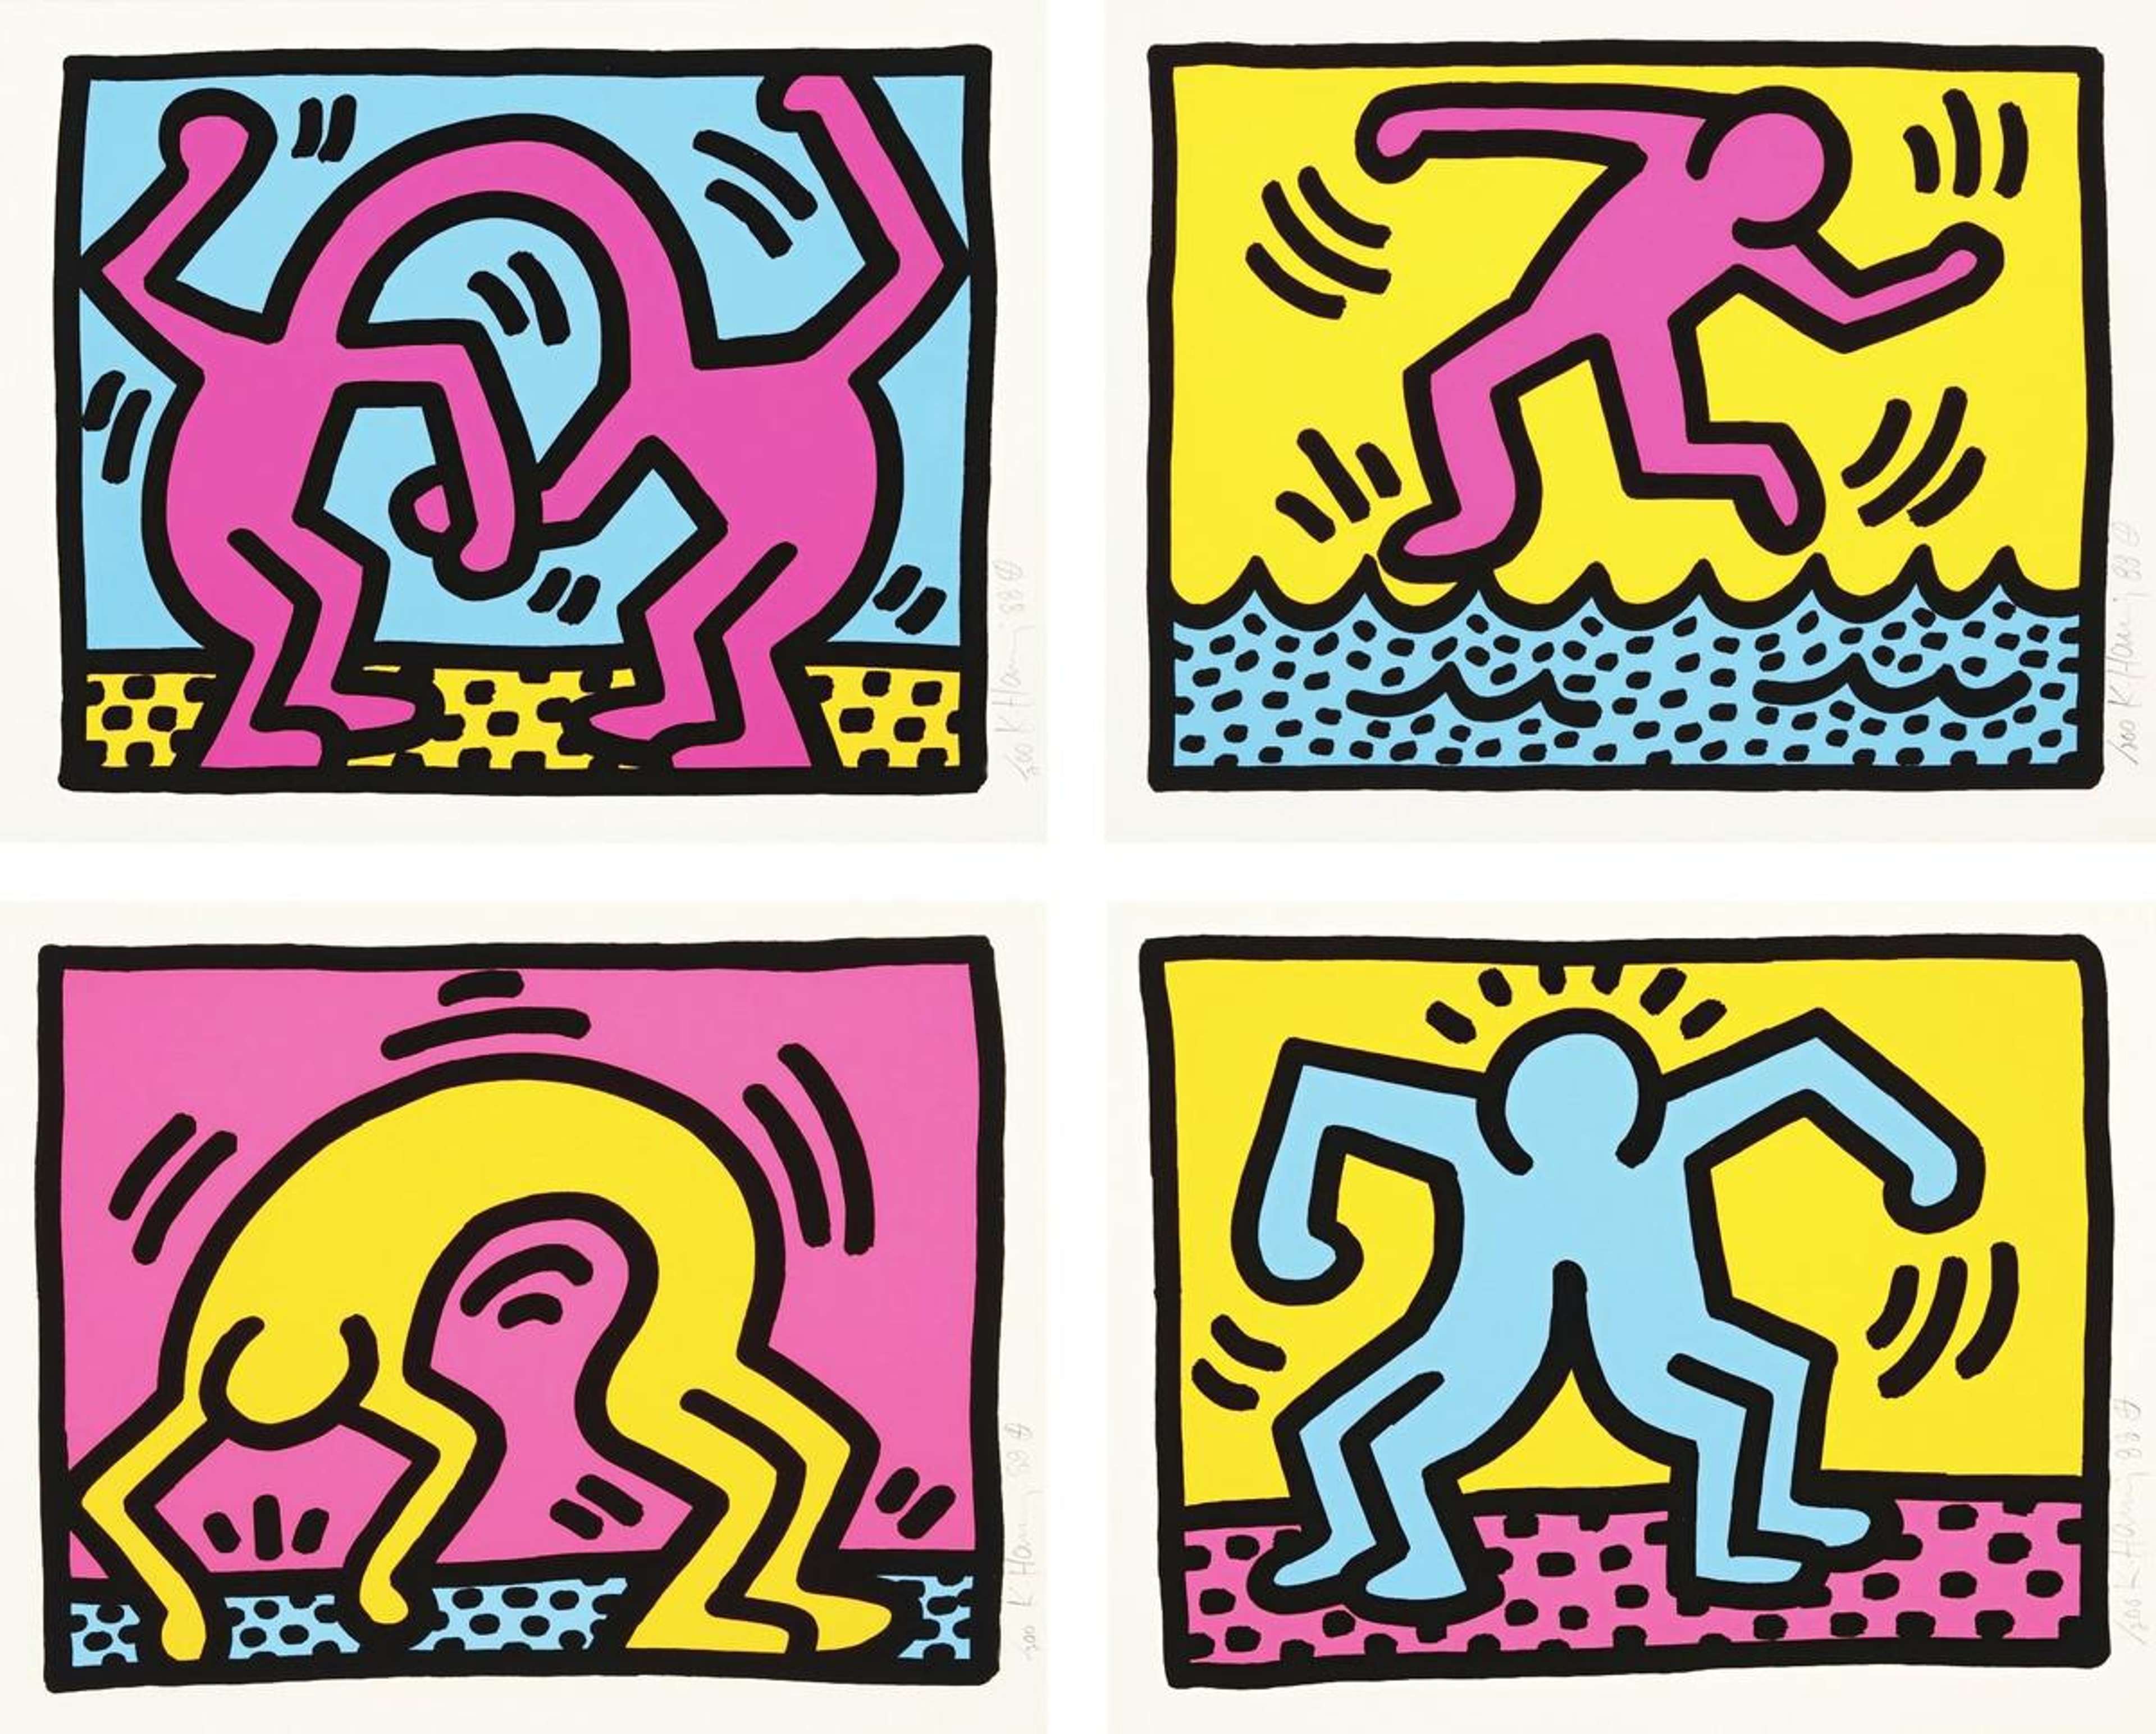 A set of four screenprints by Keith Haring depicting cartoonish figures in different poses, all in a palette of yellow, pink, and light blue, with graphic black outlines.